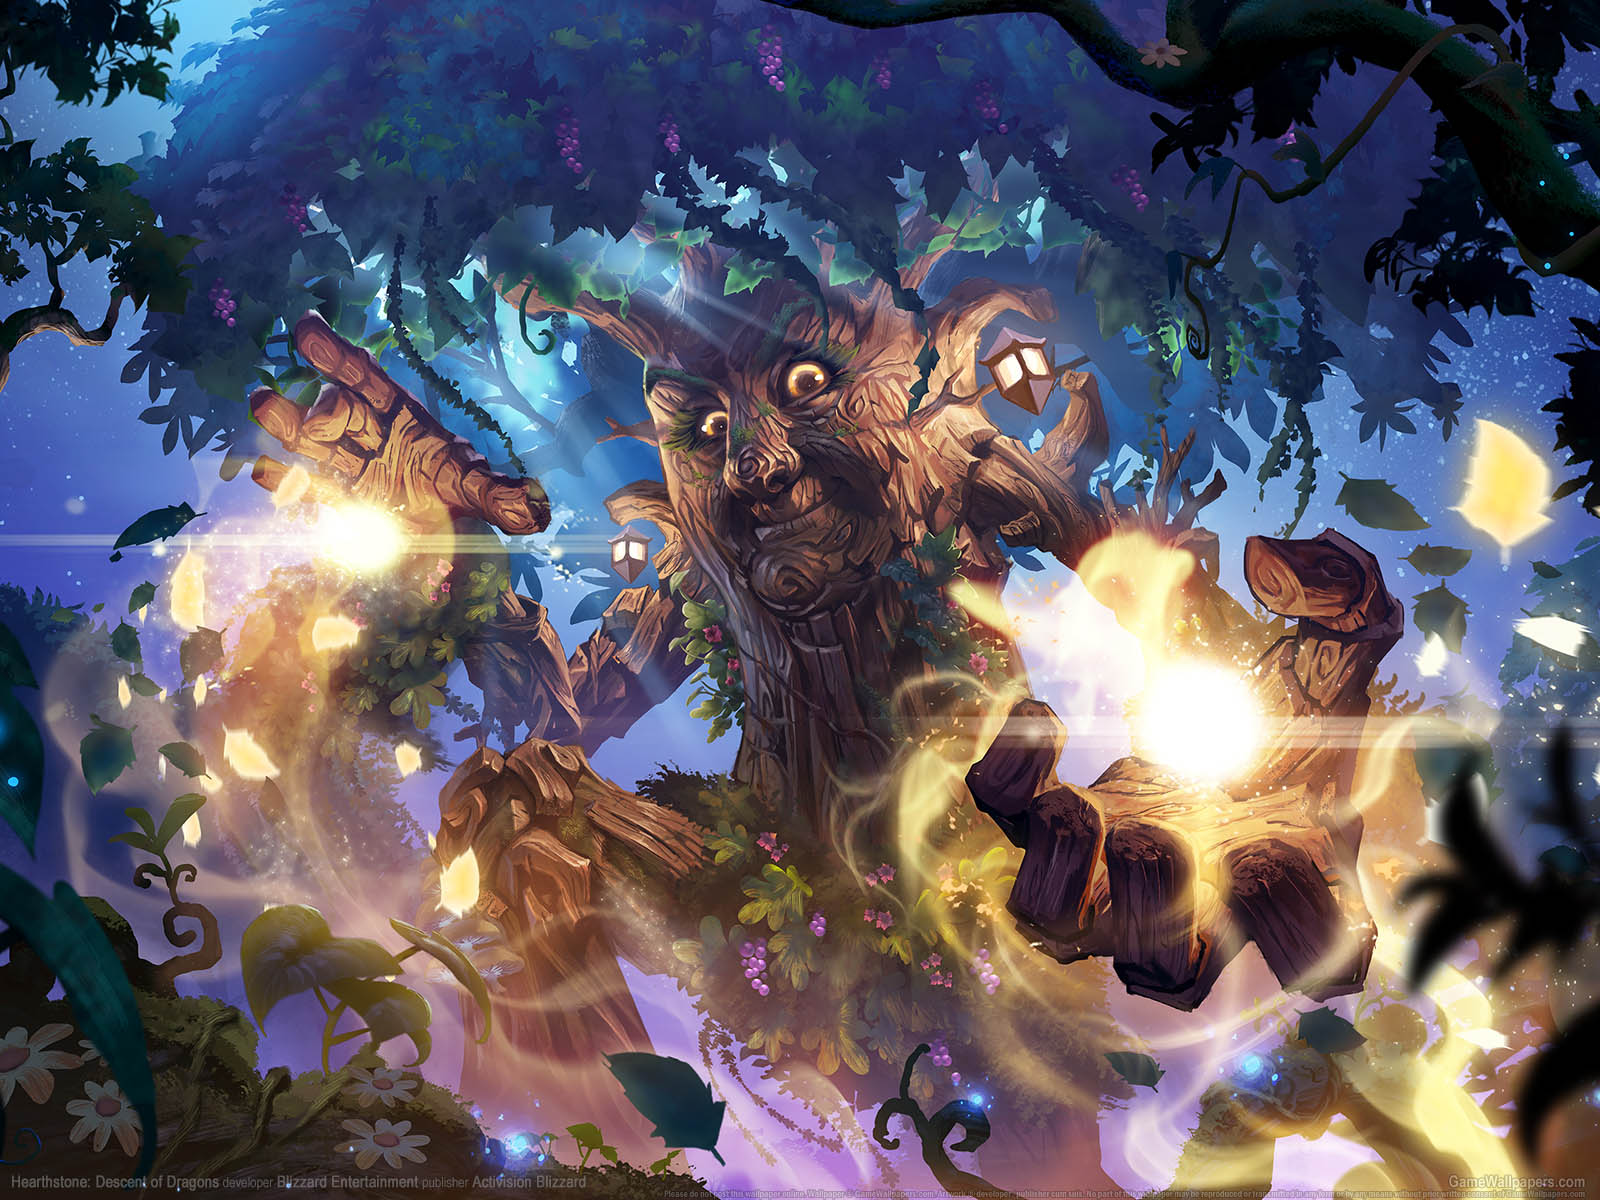 Hearthstone%3A Descent of Dragons wallpaper 02 1600x1200